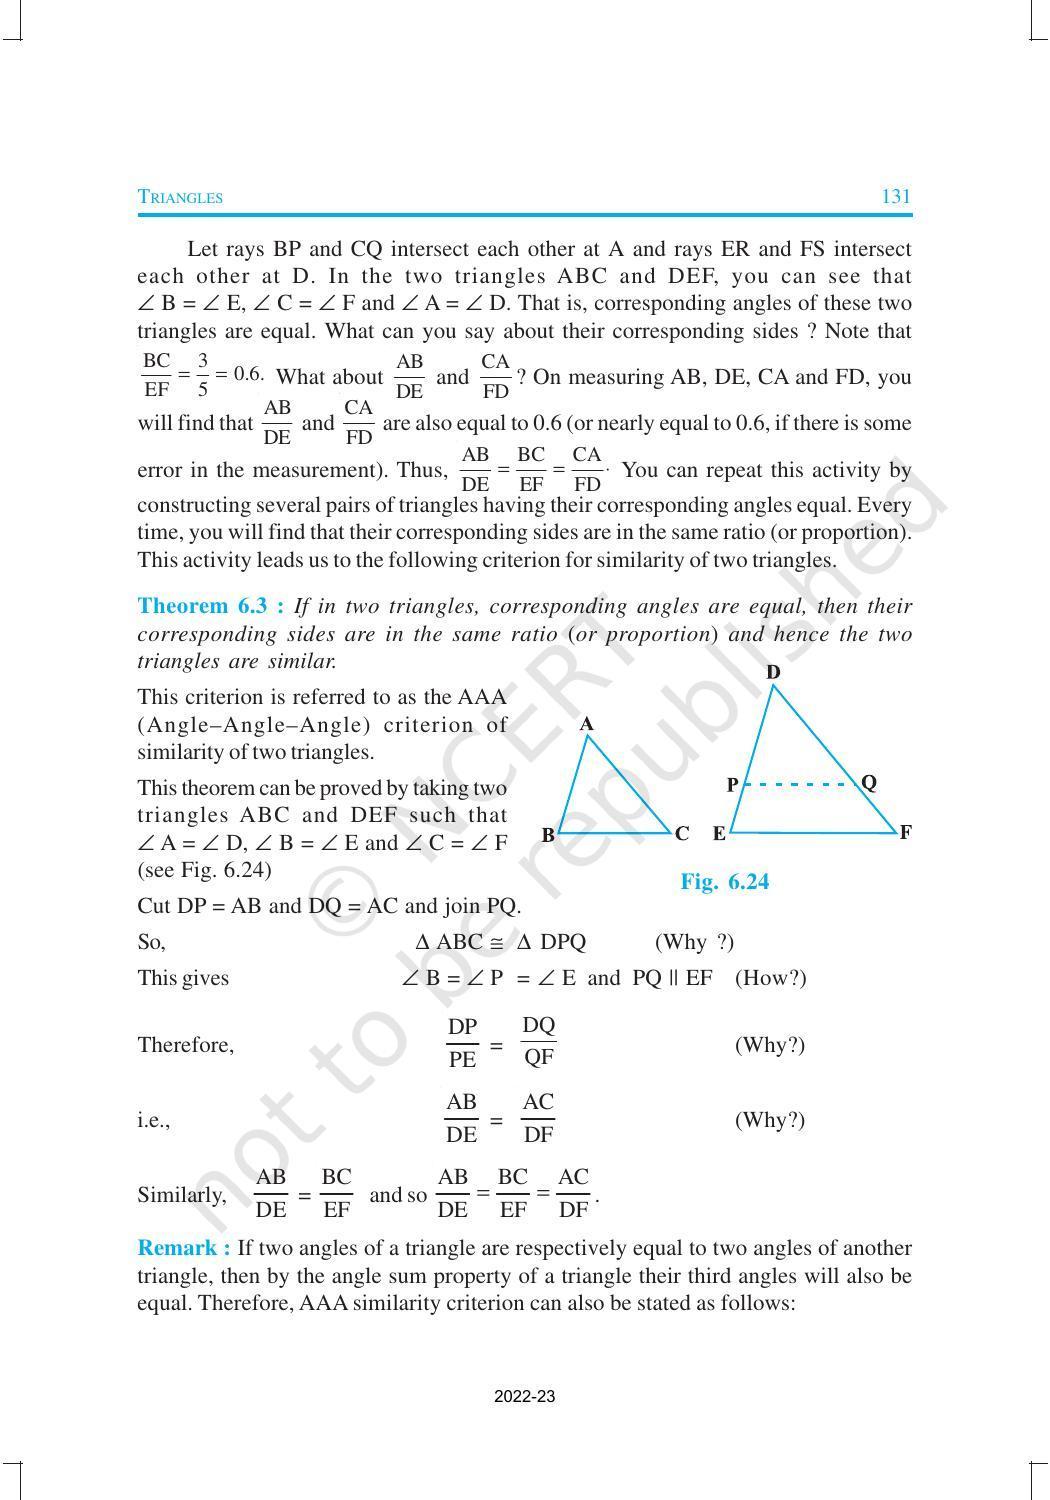 NCERT Book for Class 10 Maths Chapter 6 Triangles - Page 15